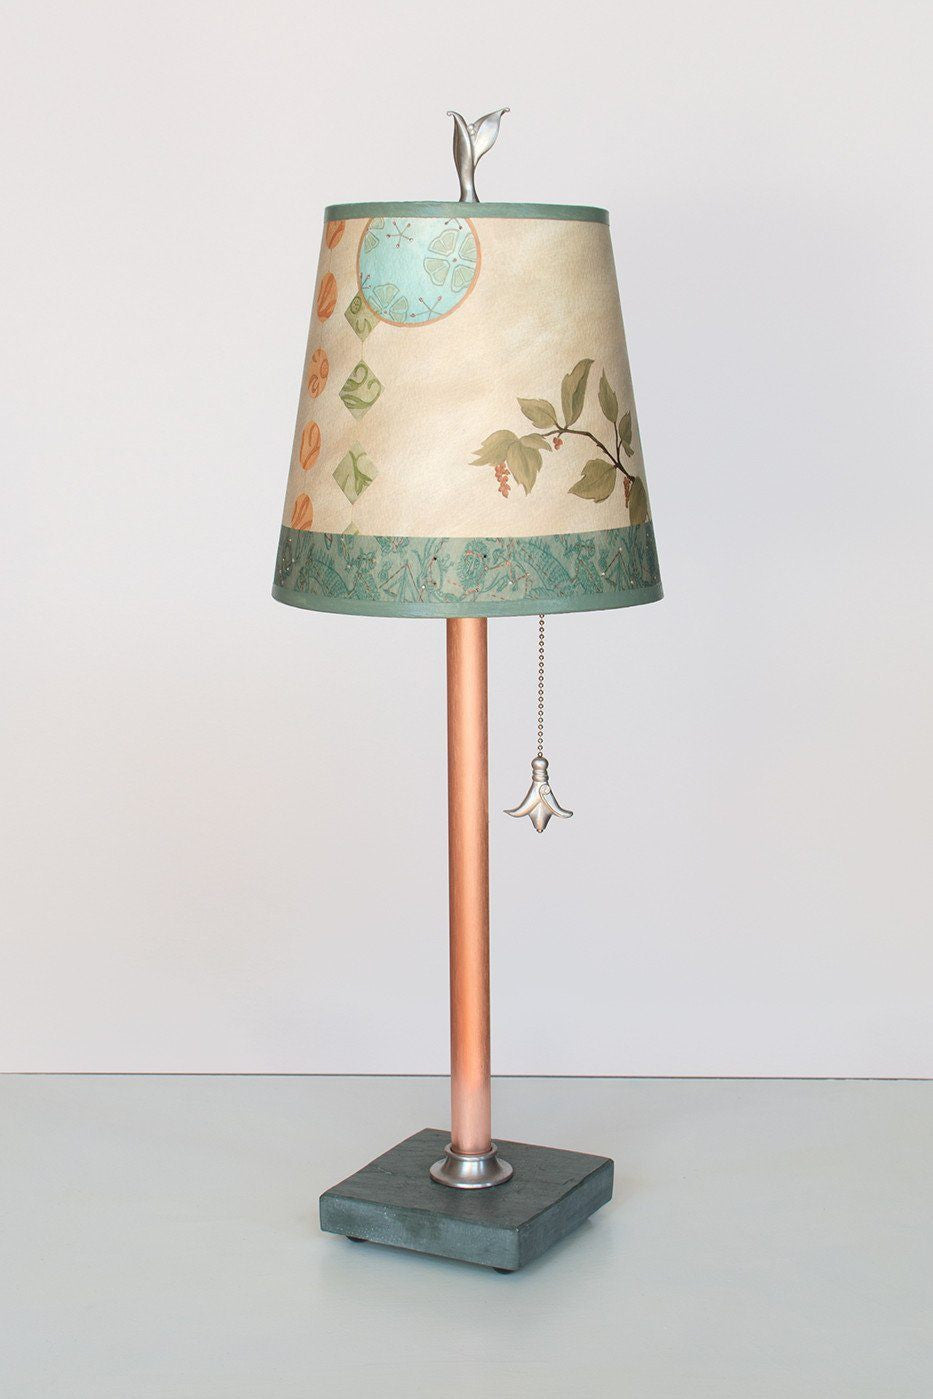 Copper Table Lamp on Vermont Slate Base with Small Drum Shade in Celestial Leaf